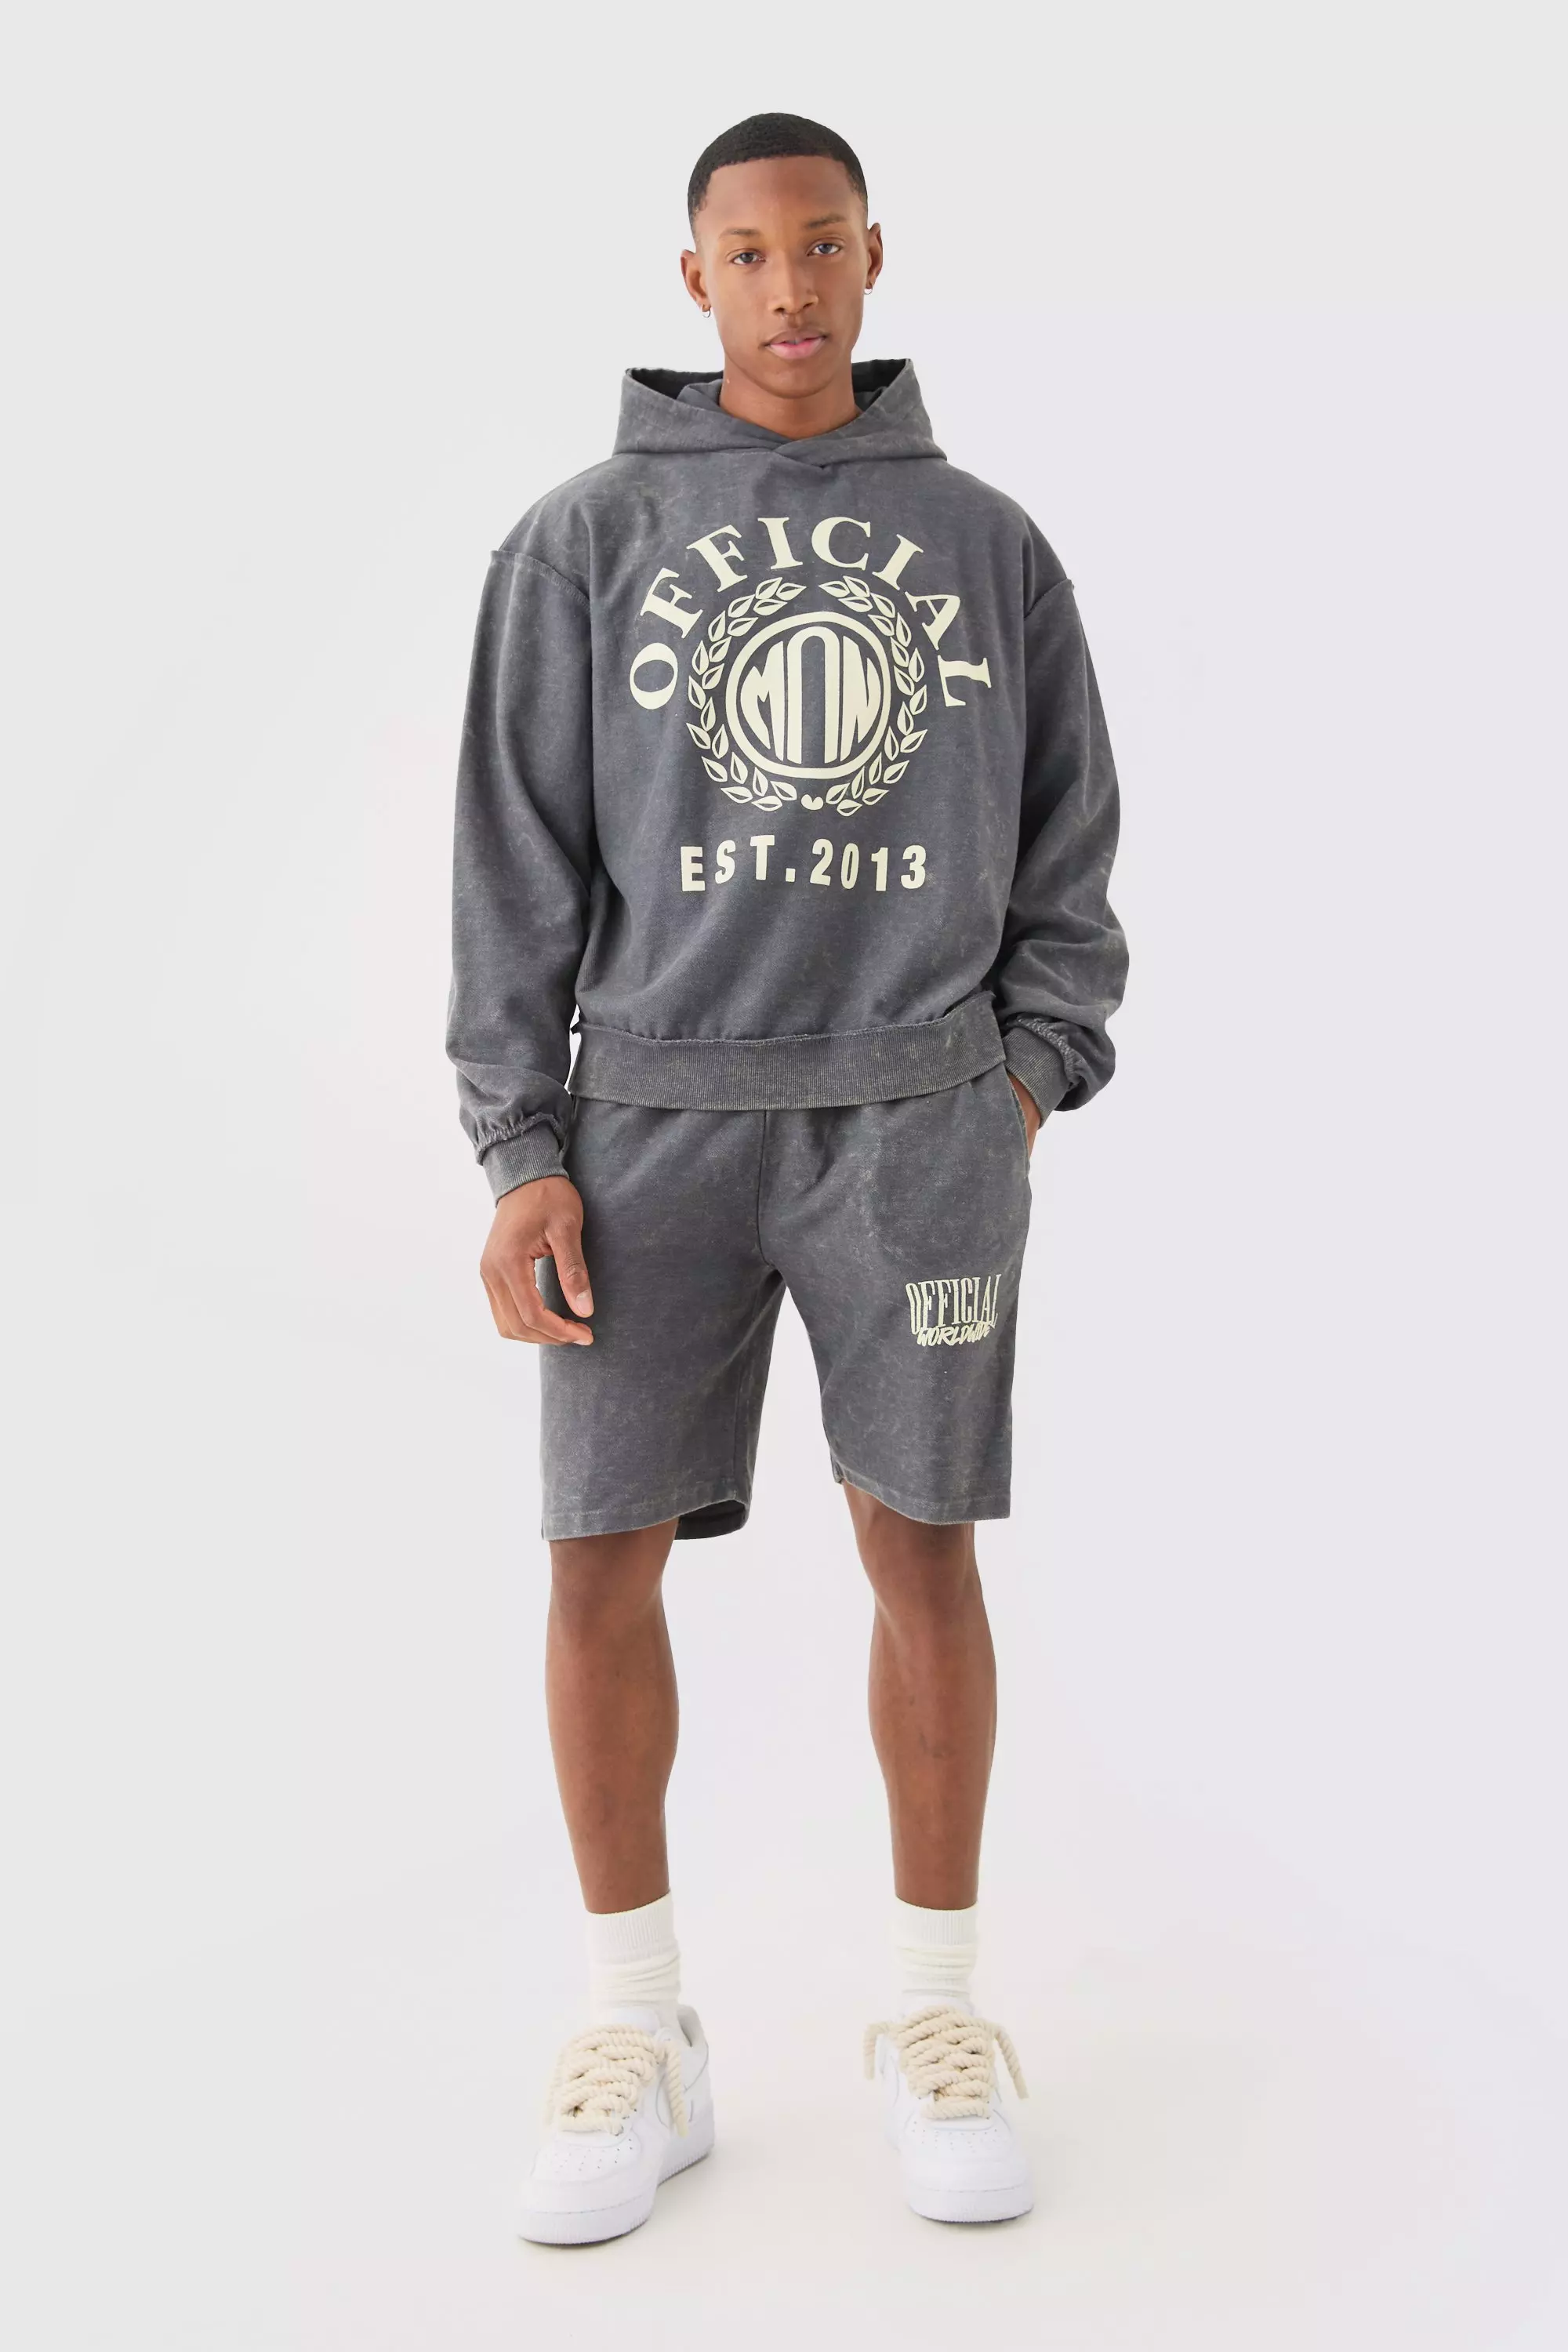 Charcoal Grey Oversized Boxy Reverse Loopback Printed Hoodie Short Tracksuit